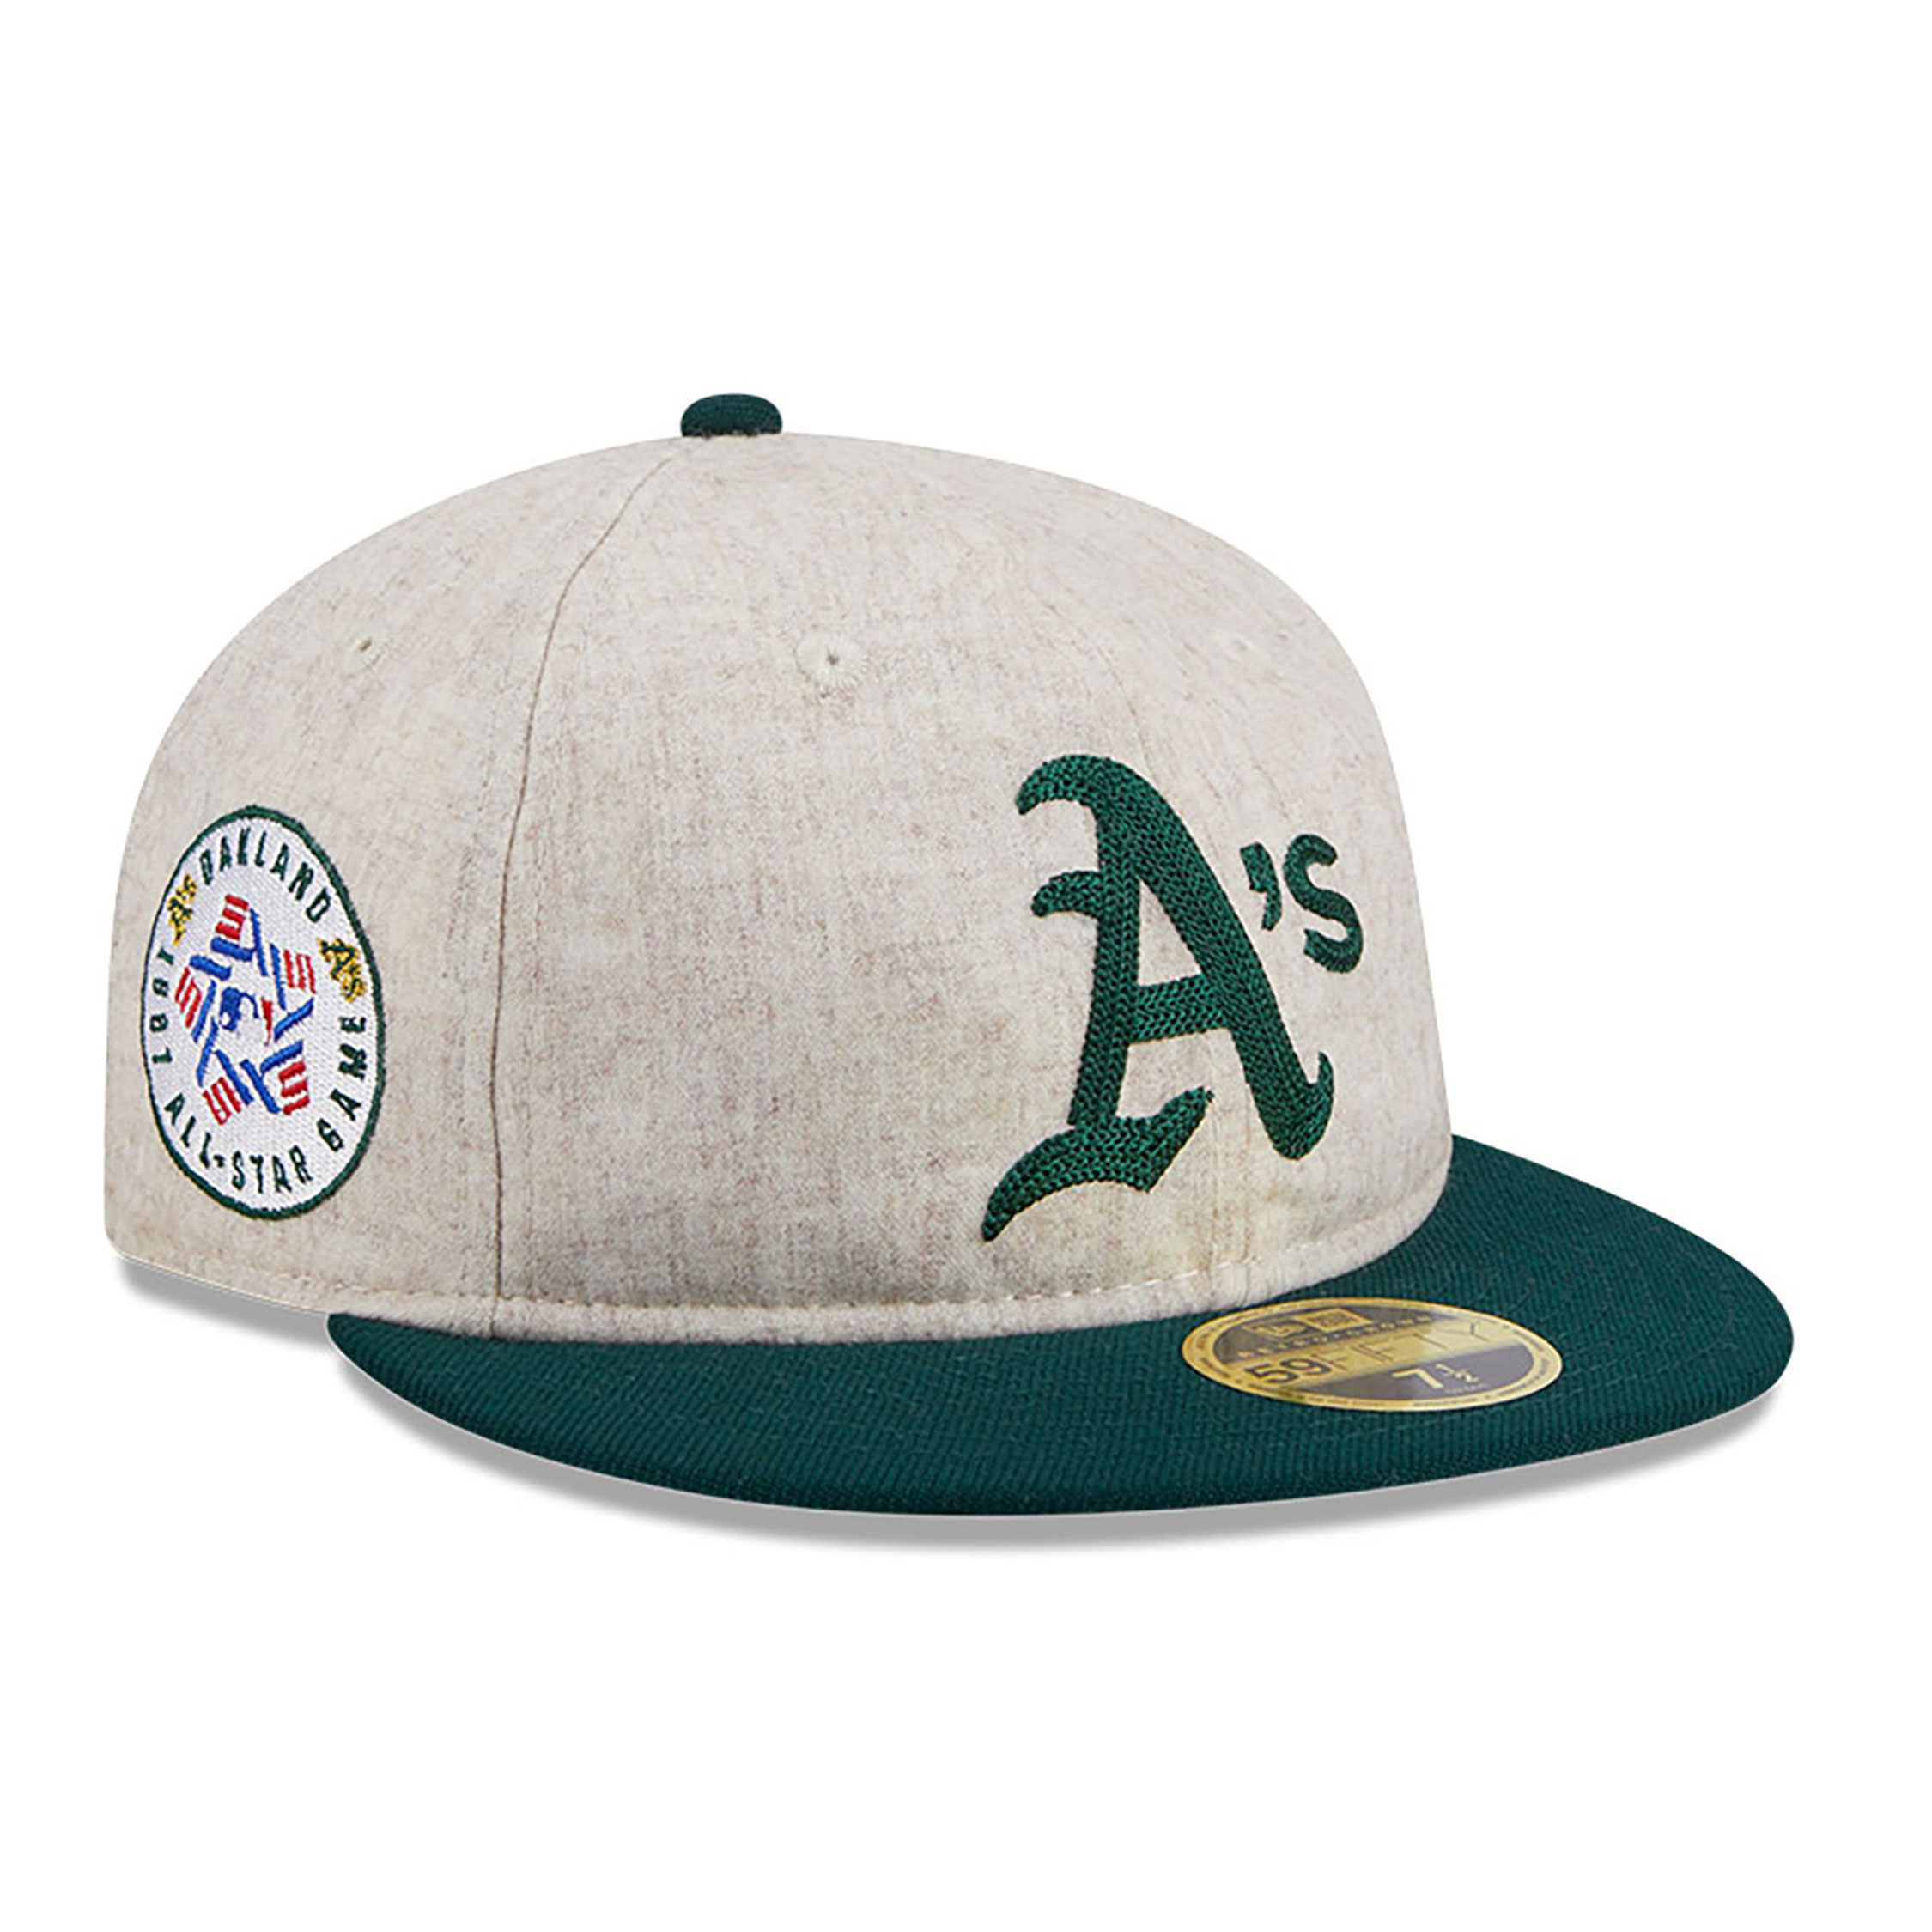 Oakland Athletics Melton Wool Light Beige Retro Crown 59FIFTY Fitted Cap